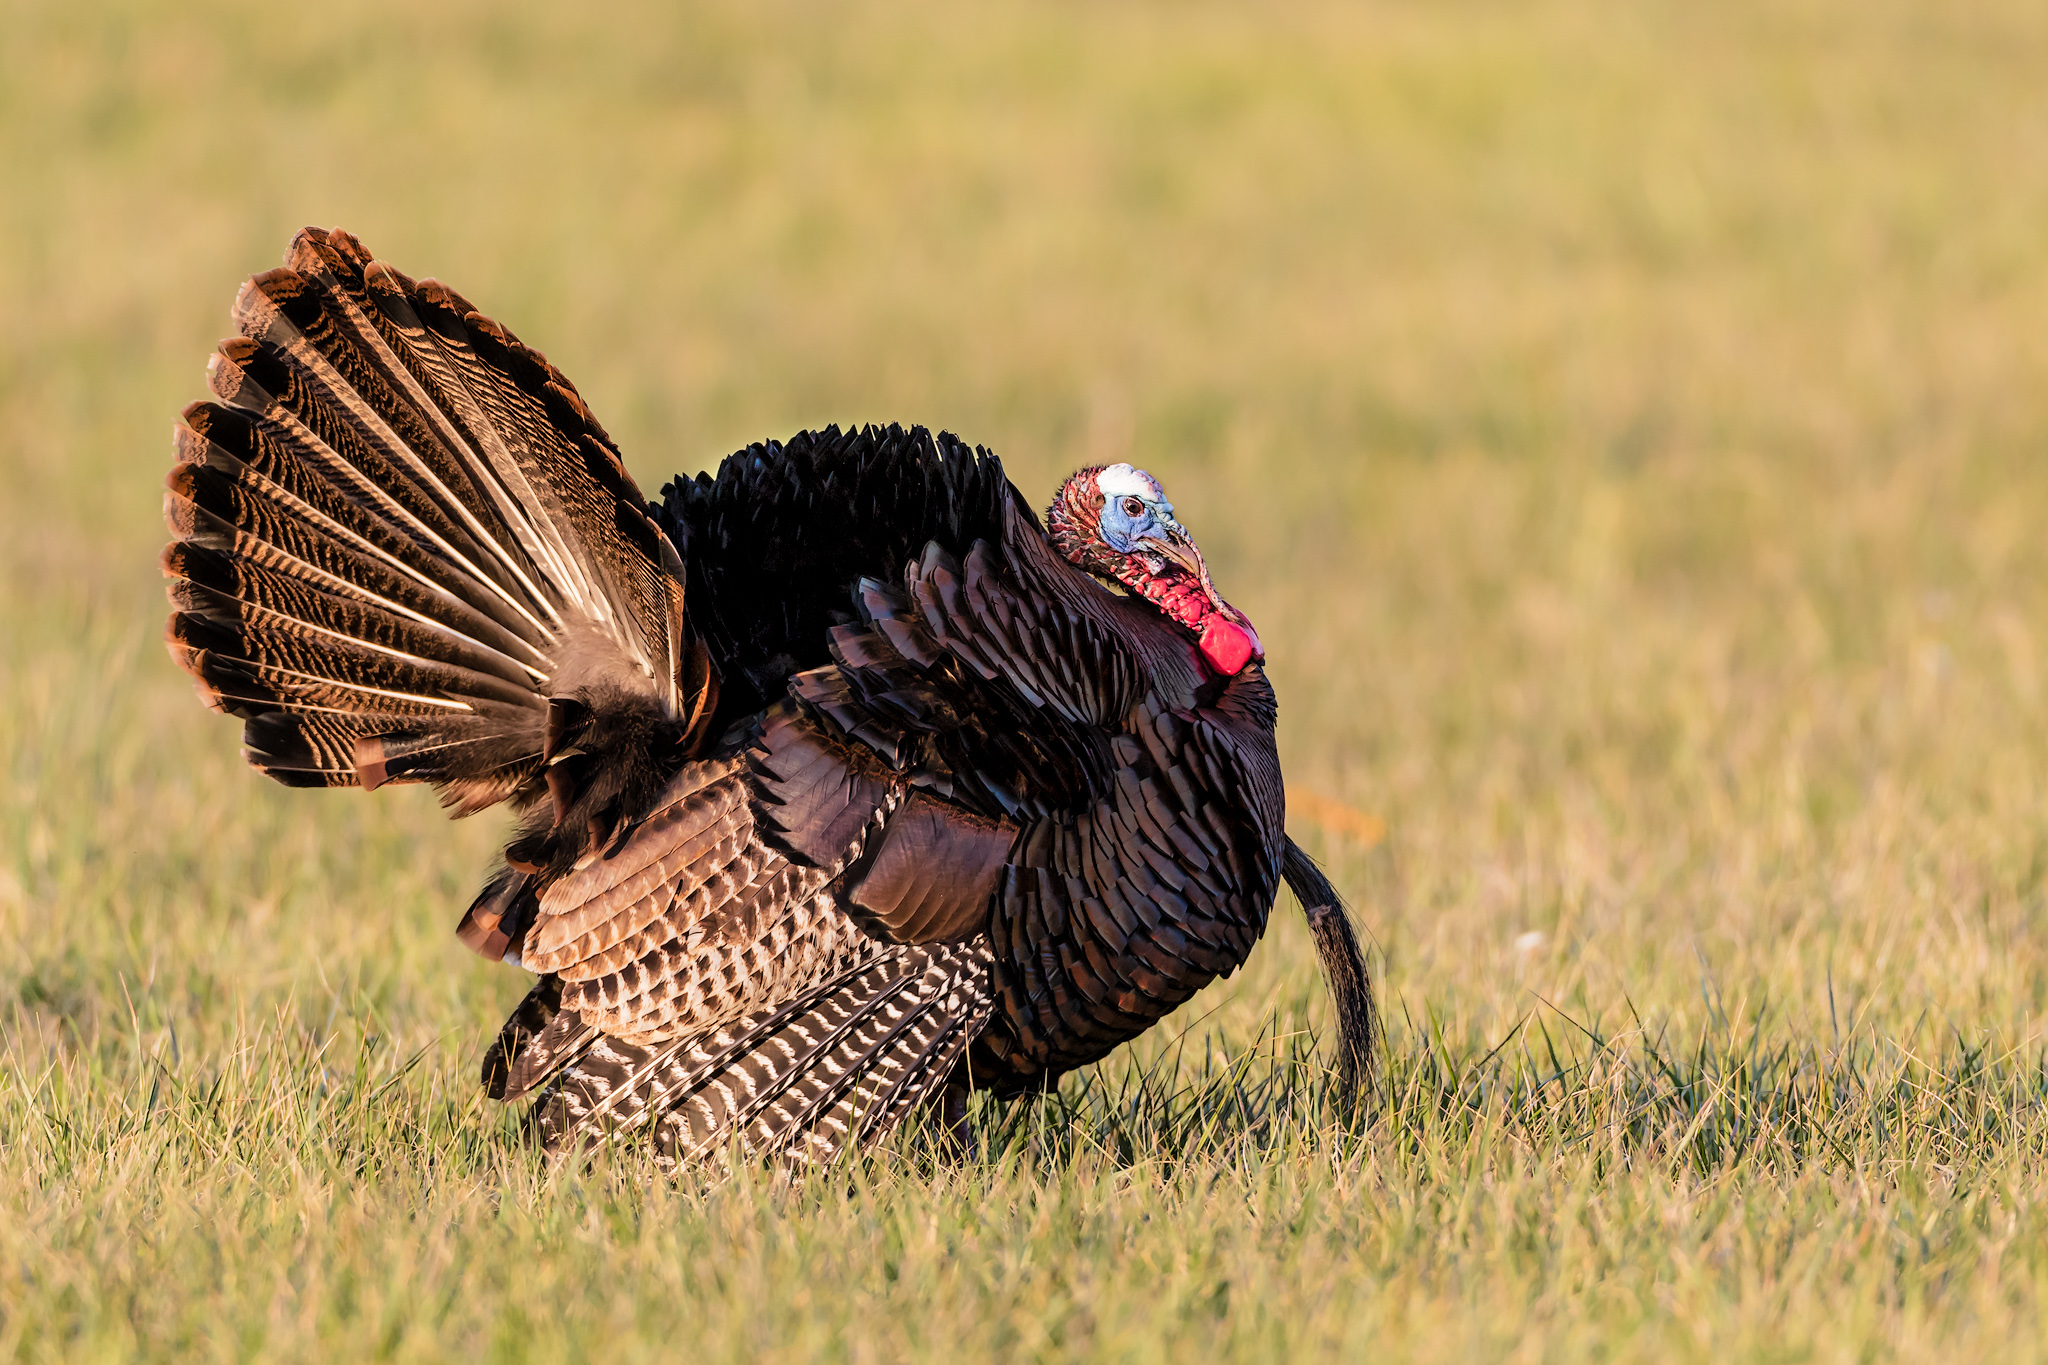 Tennessee’s wild turkey population is declining, and the state wildlife